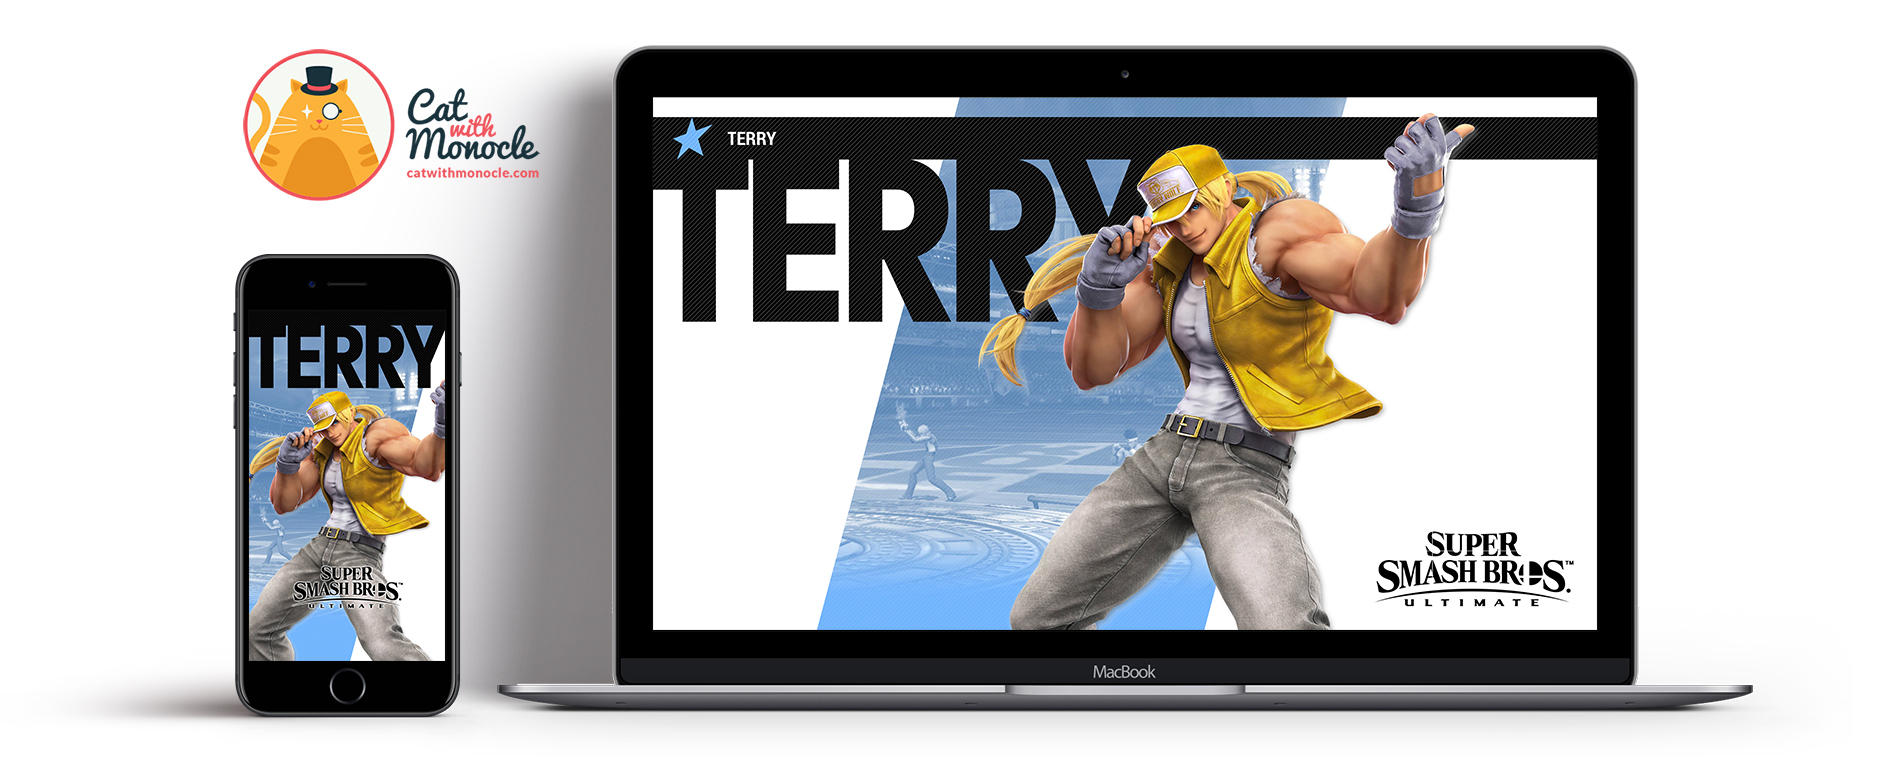 Super Smash Bros Ultimate Terry Wallpapers Costume 8